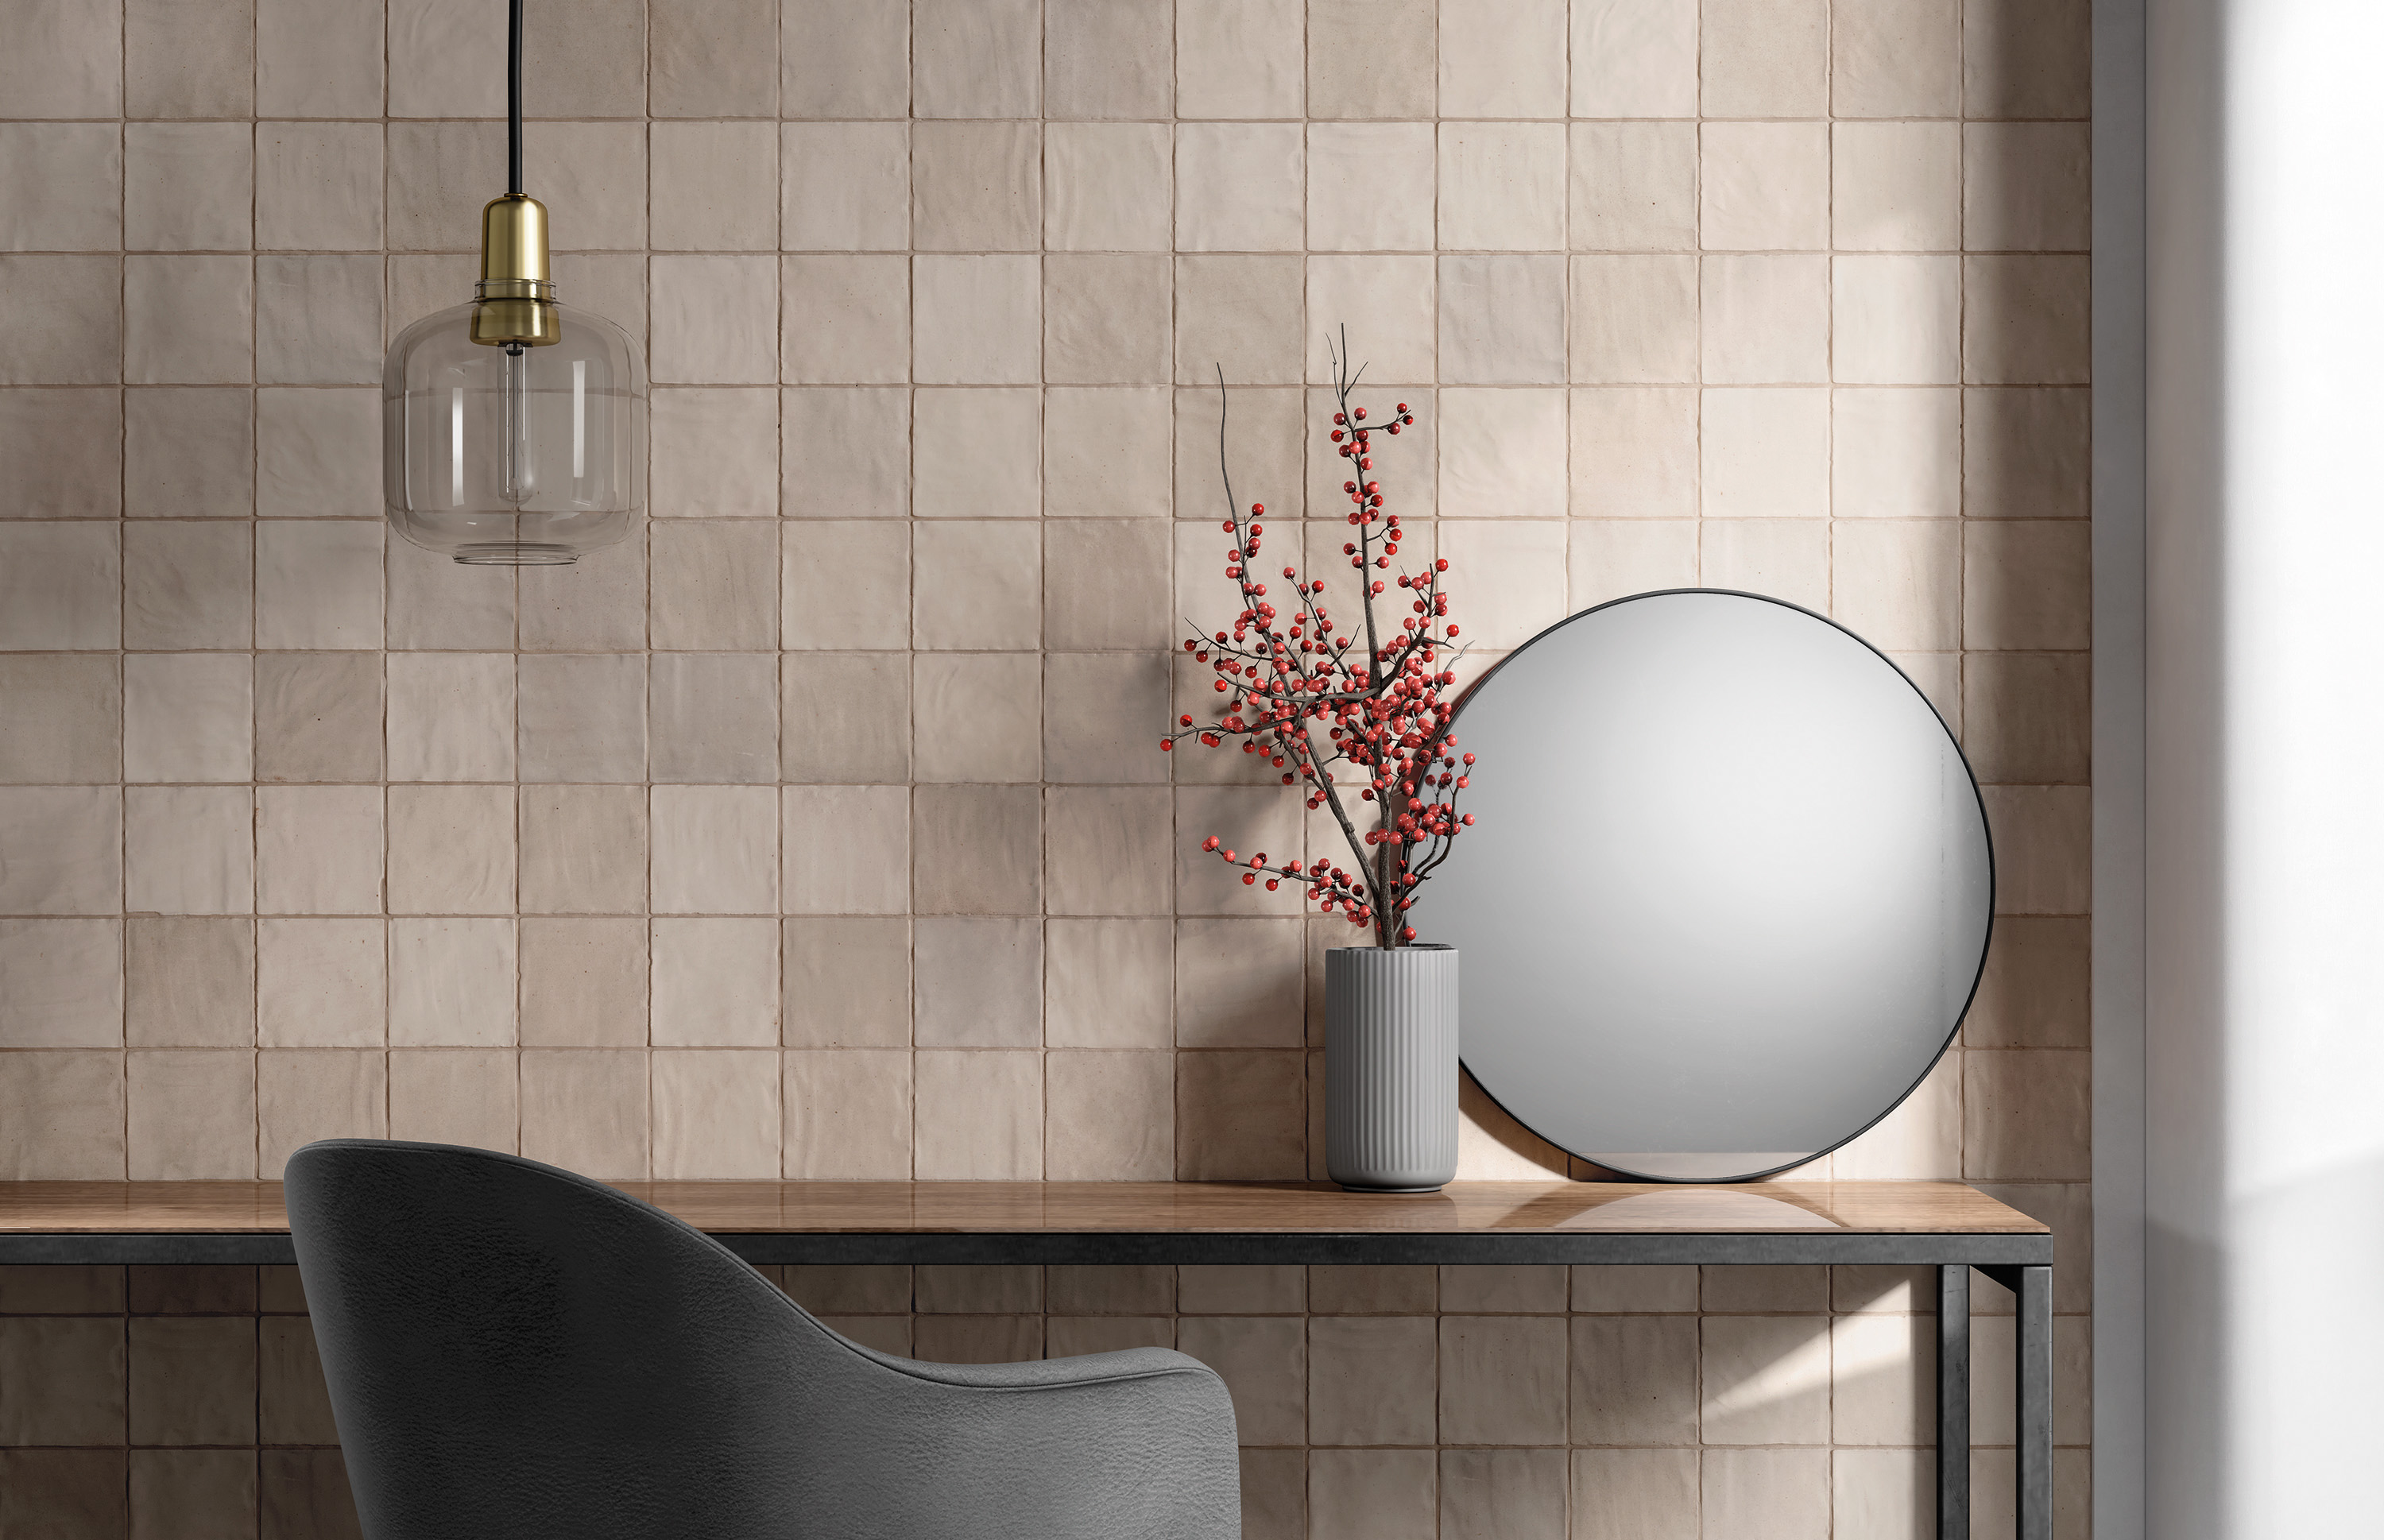 Wall tiles from the Sahn collection by Harmony. 